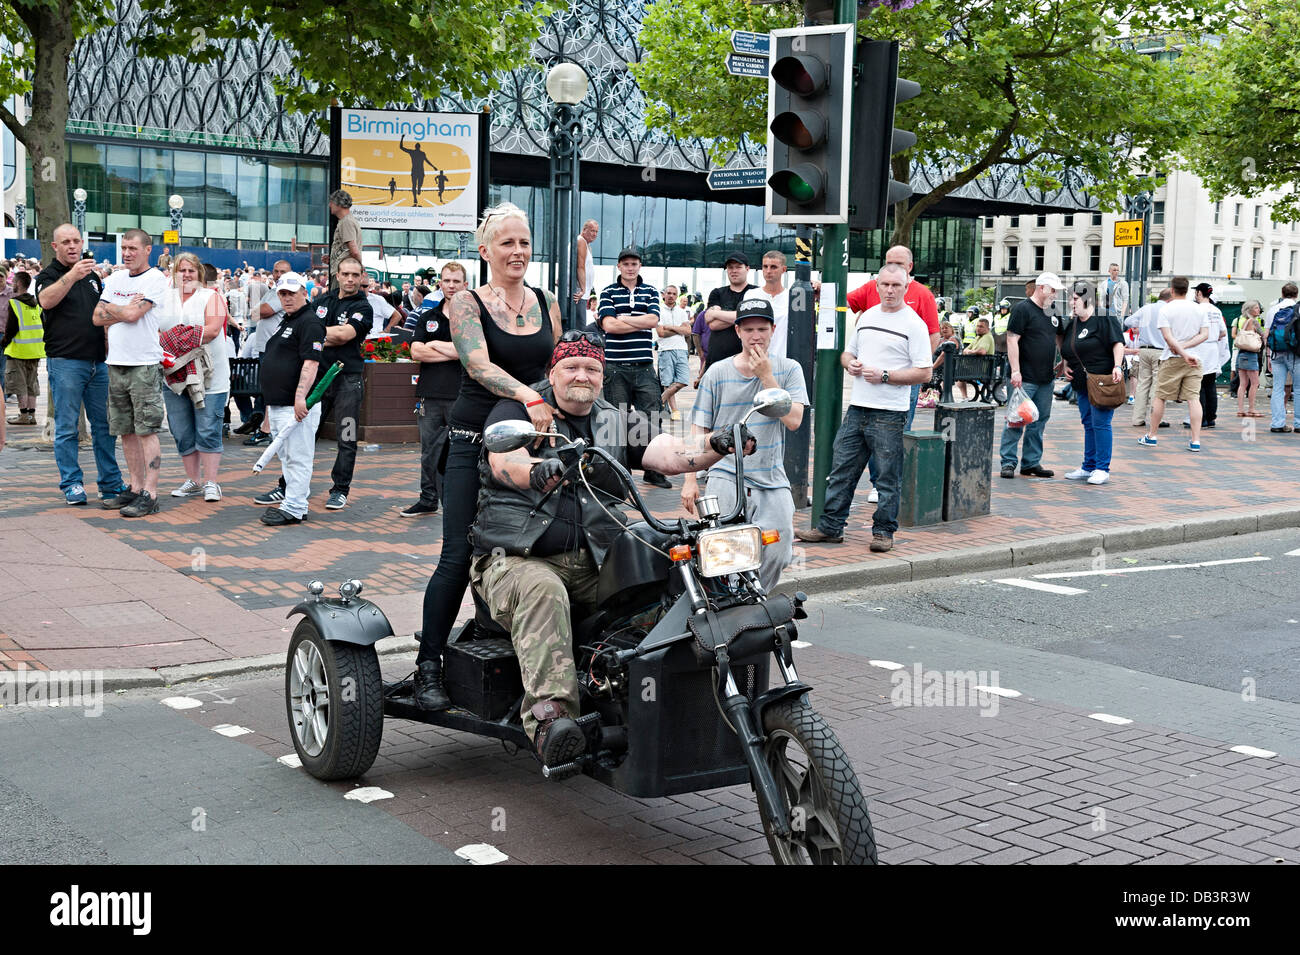 edl protest birmingham july 20th 2013 members of outlaw/crusader bike gang chapter helping with security Stock Photo